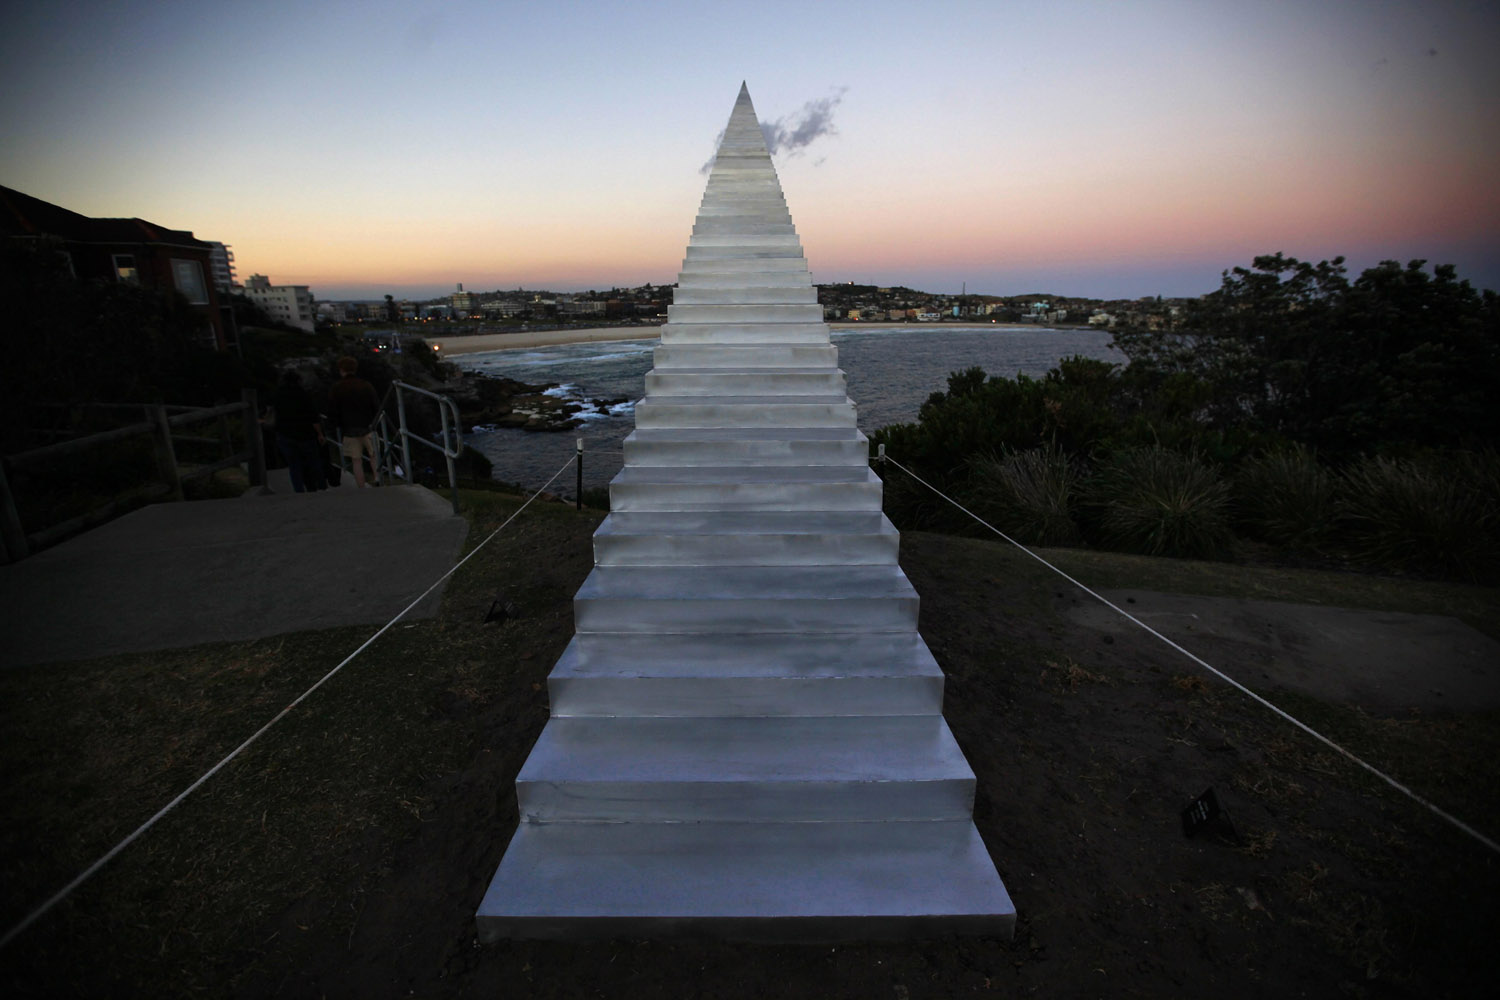 A sculpture by artist David McCracken titled 'diminish and ascend' can be seen as part of the "Sculpture by the Sea" exhibition at Sydney's Bondi Beach